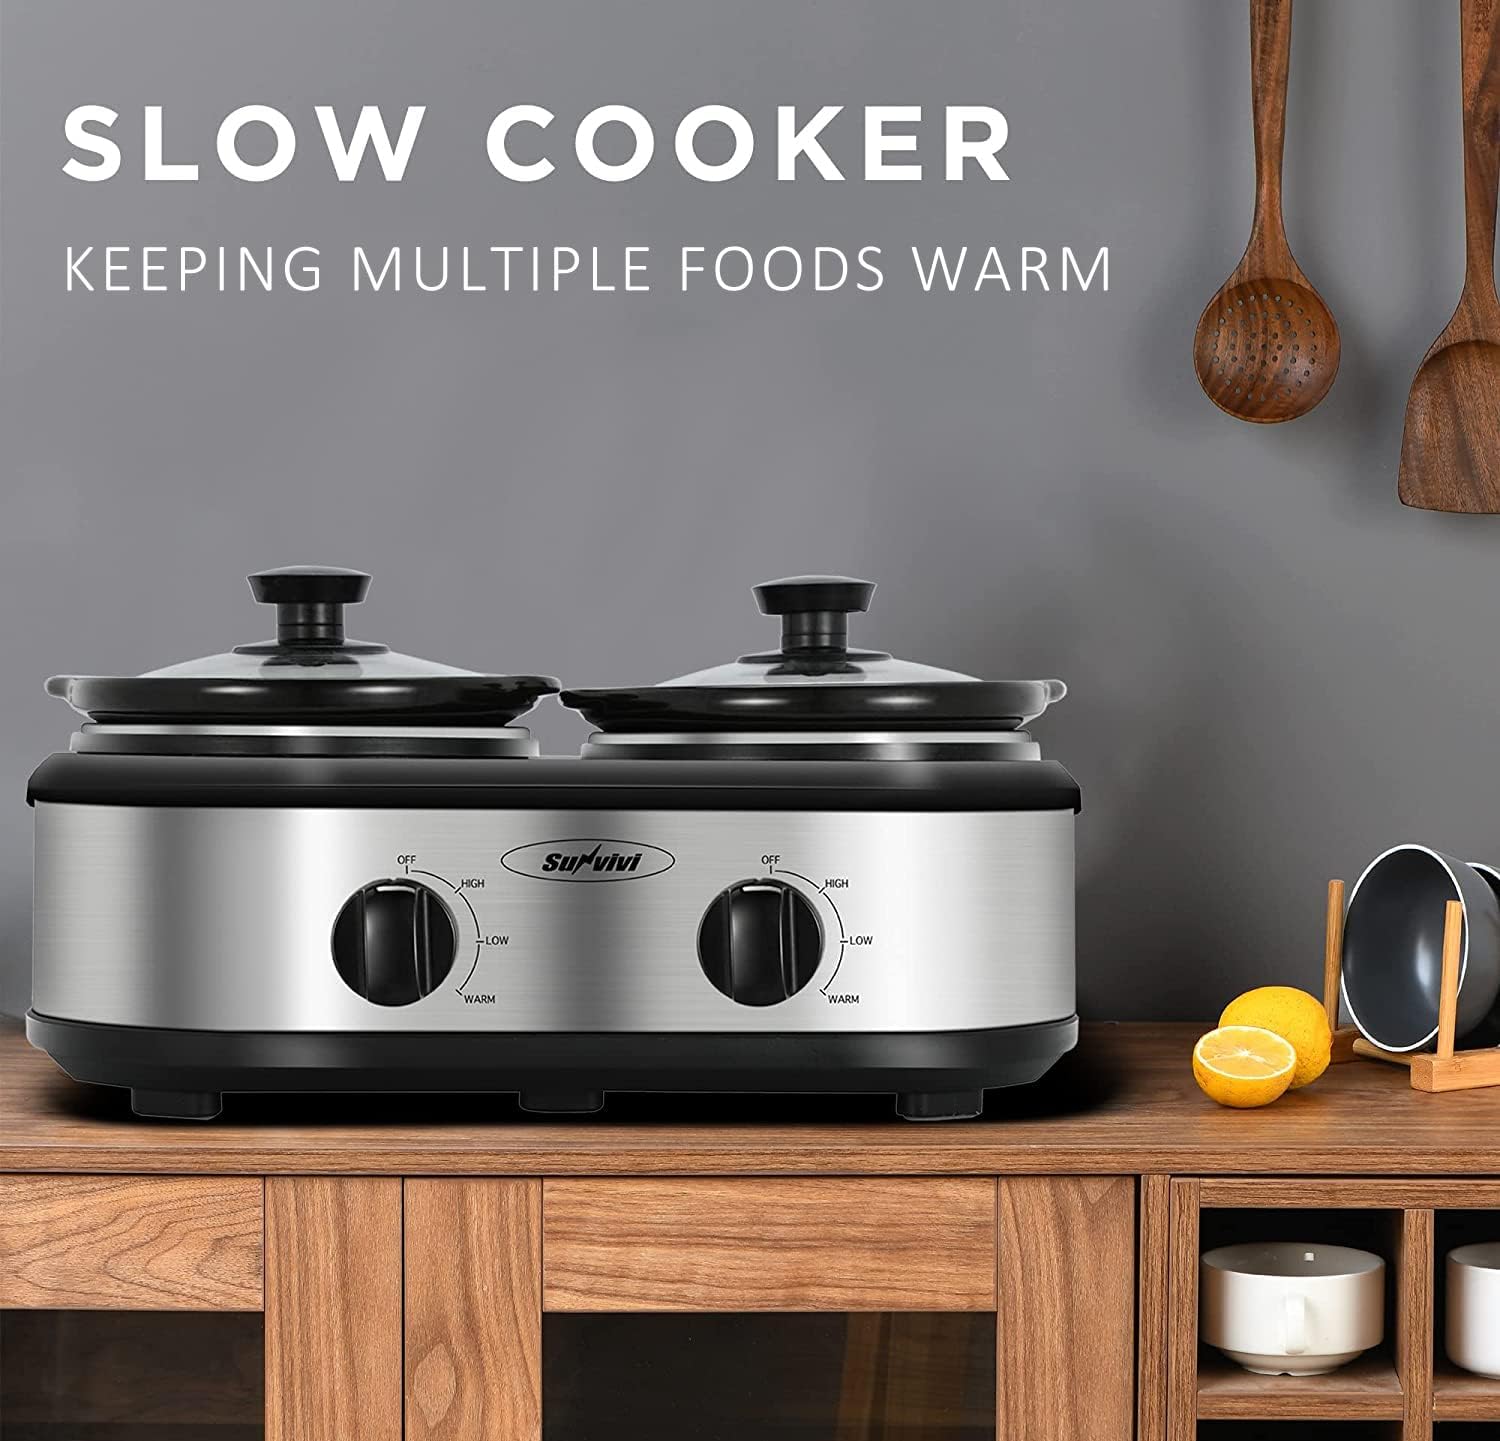 Sunvivi Double Slow Cooker,2 Pot Small Mini Crock Buffet Servers and Warmer,Dual Pot Oval Manual Slow Cooker with Adjustable Temp Removable Ceramic Pot,Stainless Steel, Total 2.5 Quarts Red